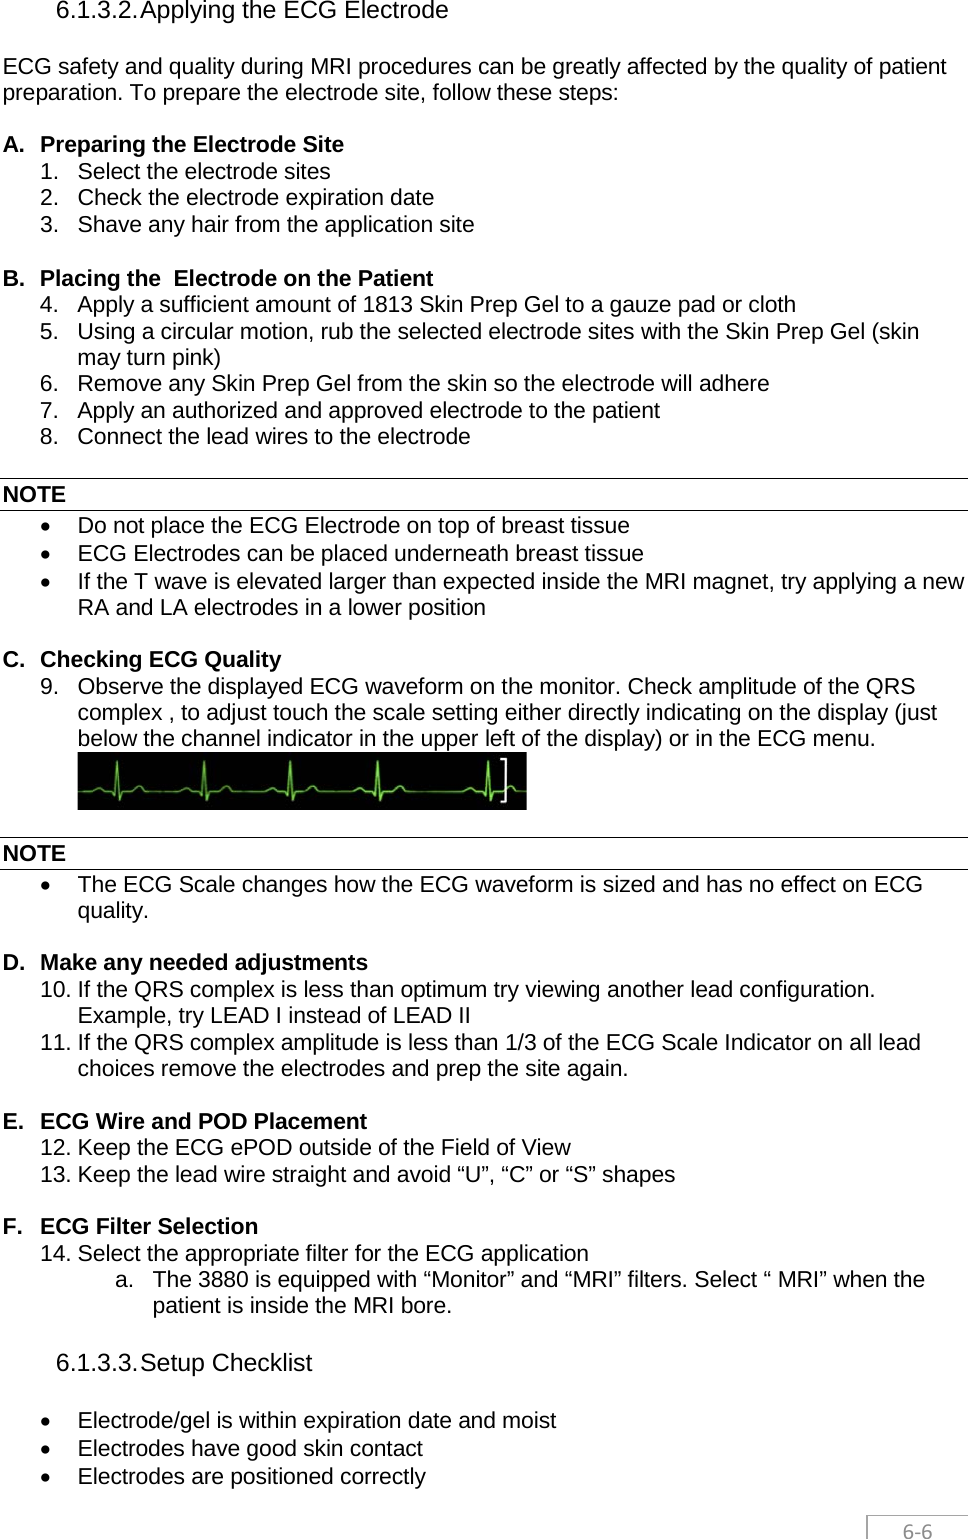  6-6 6.1.3.2. Applying the ECG Electrode ECG safety and quality during MRI procedures can be greatly affected by the quality of patient preparation. To prepare the electrode site, follow these steps:  A. Preparing the Electrode Site 1. Select the electrode sites 2. Check the electrode expiration date 3. Shave any hair from the application site  B. Placing the  Electrode on the Patient 4. Apply a sufficient amount of 1813 Skin Prep Gel to a gauze pad or cloth 5. Using a circular motion, rub the selected electrode sites with the Skin Prep Gel (skin may turn pink) 6. Remove any Skin Prep Gel from the skin so the electrode will adhere 7. Apply an authorized and approved electrode to the patient 8. Connect the lead wires to the electrode  NOTE • Do not place the ECG Electrode on top of breast tissue • ECG Electrodes can be placed underneath breast tissue • If the T wave is elevated larger than expected inside the MRI magnet, try applying a new RA and LA electrodes in a lower position  C. Checking ECG Quality 9. Observe the displayed ECG waveform on the monitor. Check amplitude of the QRS complex , to adjust touch the scale setting either directly indicating on the display (just below the channel indicator in the upper left of the display) or in the ECG menu.   NOTE • The ECG Scale changes how the ECG waveform is sized and has no effect on ECG quality.  D. Make any needed adjustments 10. If the QRS complex is less than optimum try viewing another lead configuration. Example, try LEAD I instead of LEAD II 11. If the QRS complex amplitude is less than 1/3 of the ECG Scale Indicator on all lead choices remove the electrodes and prep the site again.  E. ECG Wire and POD Placement 12. Keep the ECG ePOD outside of the Field of View 13. Keep the lead wire straight and avoid “U”, “C” or “S” shapes  F. ECG Filter Selection 14. Select the appropriate filter for the ECG application a. The 3880 is equipped with “Monitor” and “MRI” filters. Select “ MRI” when the patient is inside the MRI bore. 6.1.3.3. Setup Checklist • Electrode/gel is within expiration date and moist • Electrodes have good skin contact • Electrodes are positioned correctly 